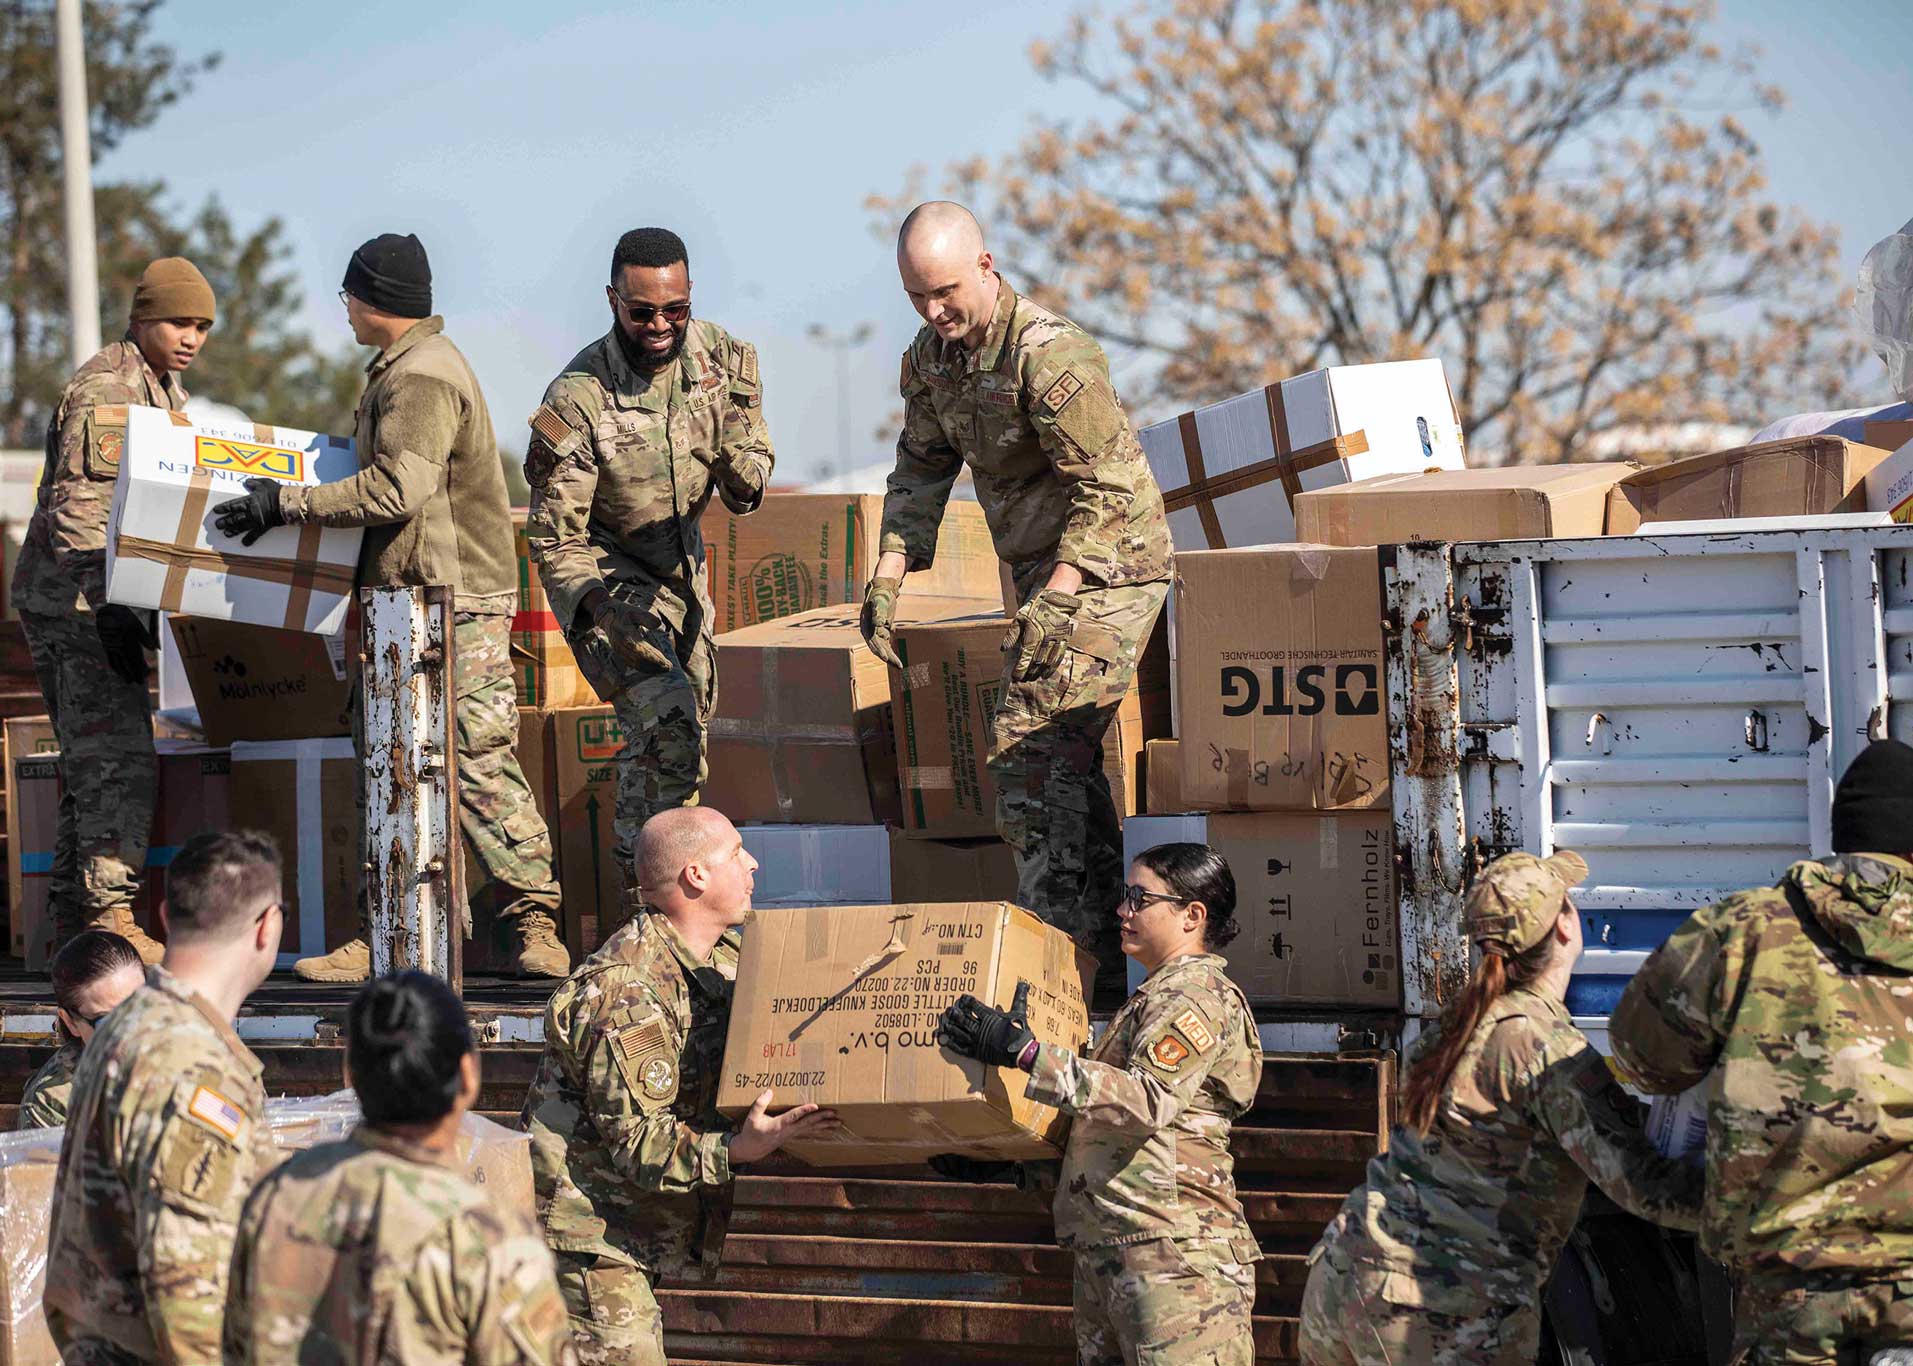 A group of soldiers loading boxes onto trucks.